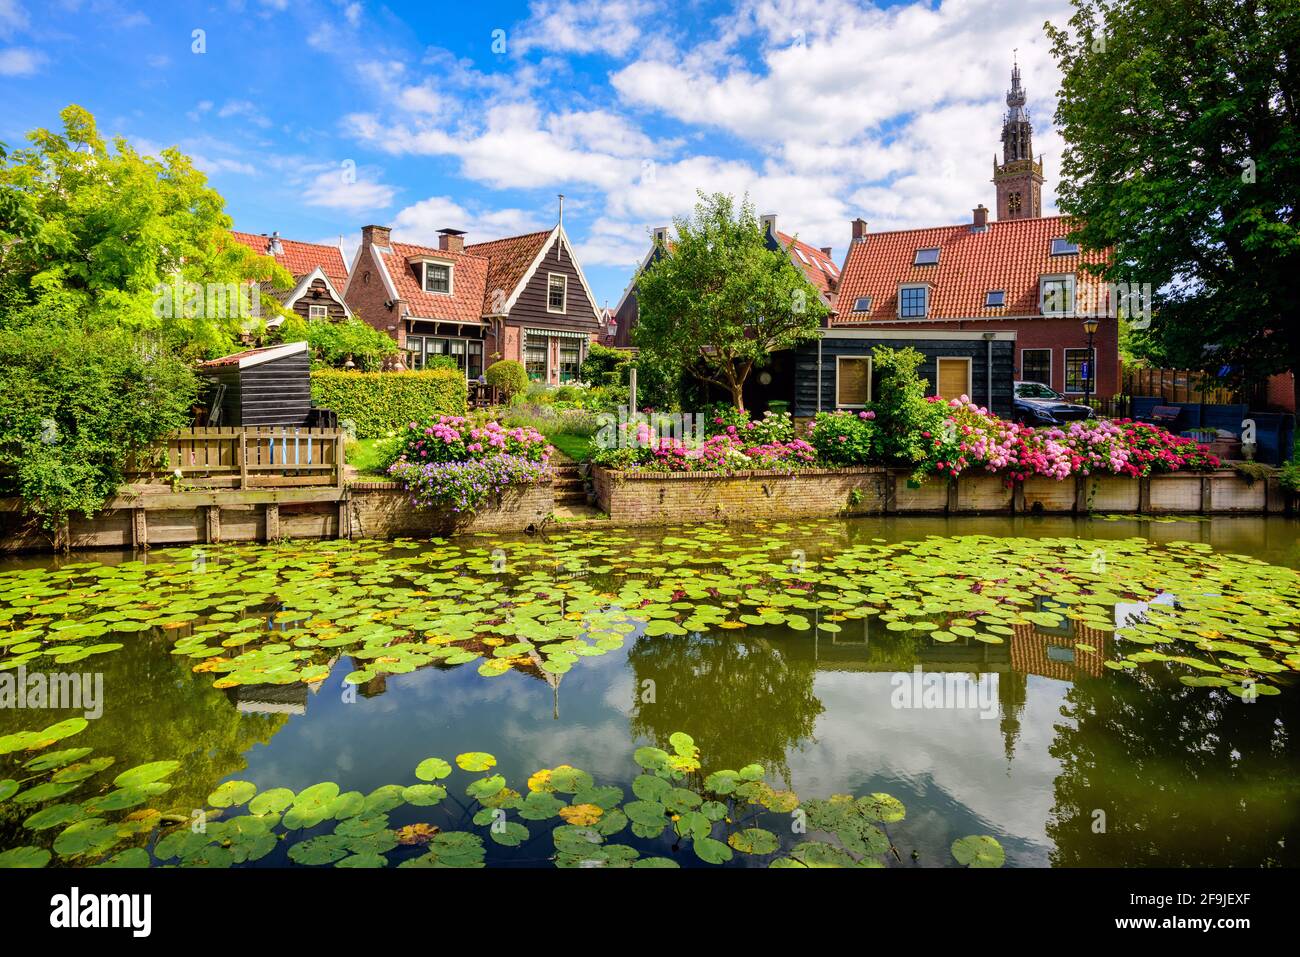 Edam town in North Holland, Netherlands, famous for its Edam cheese, view of traditional stone houses on a river covered with water lilies Stock Photo